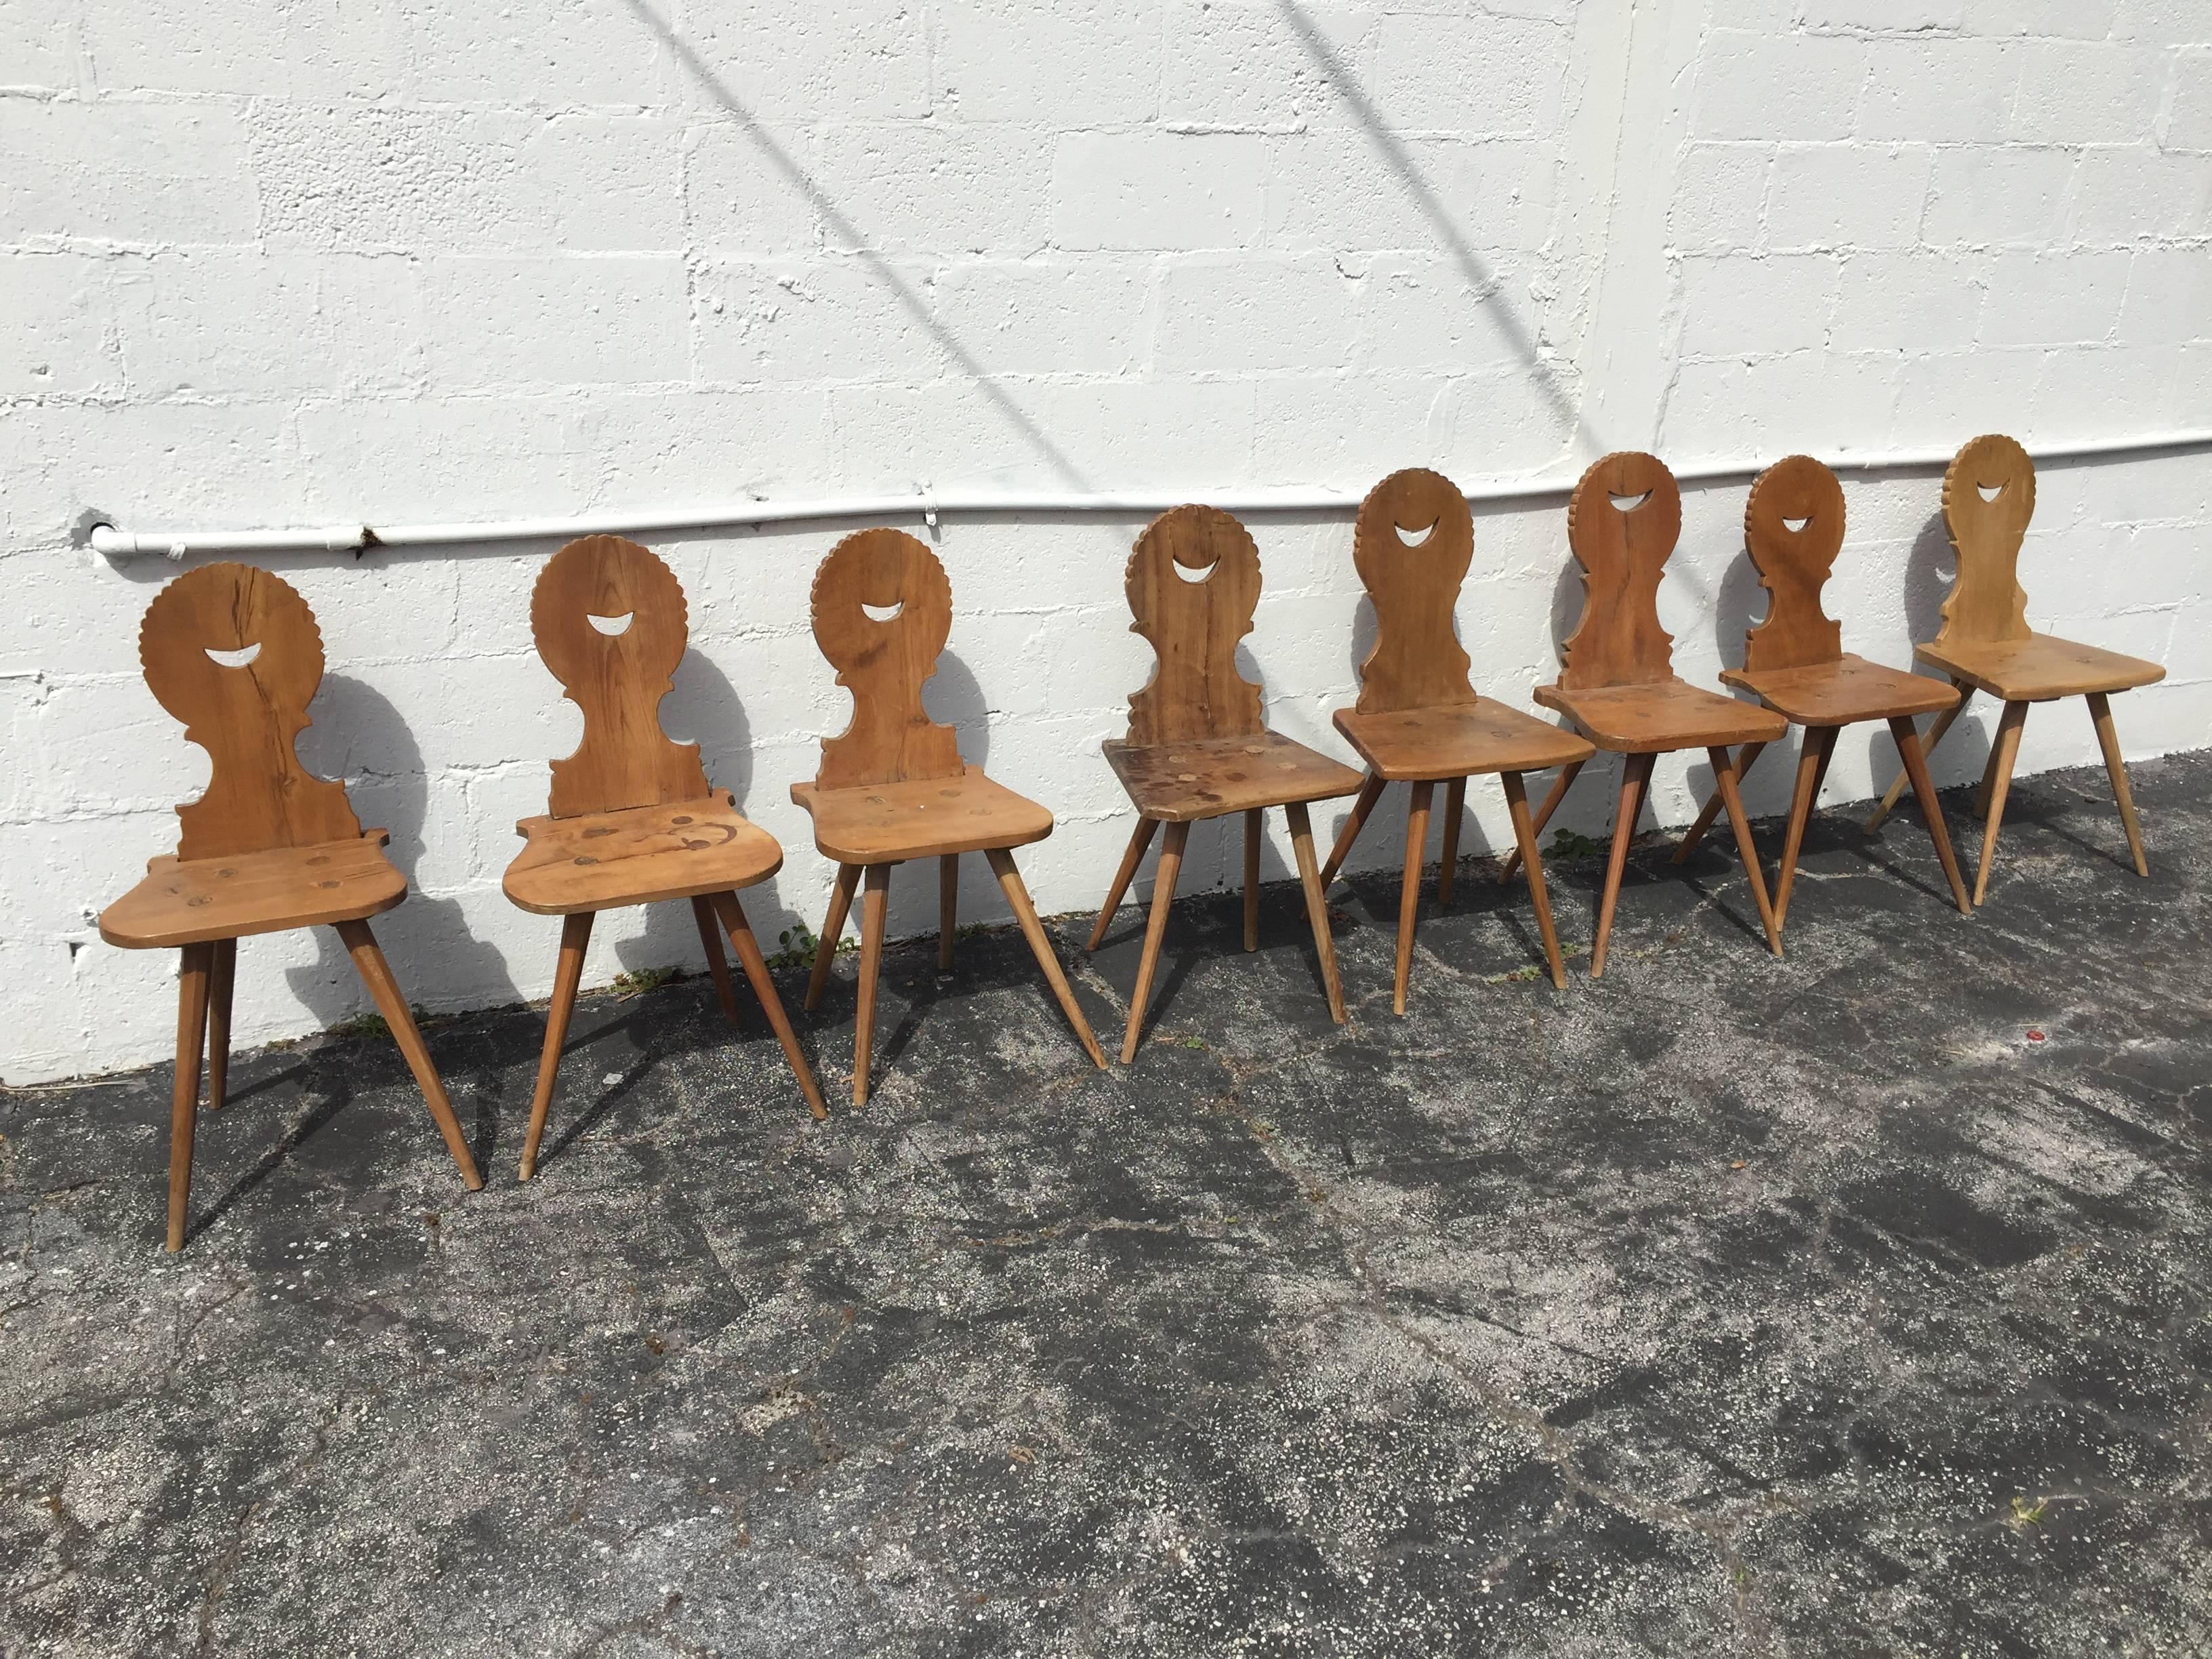 Delightful set of handmade mortise and tenon joint pine chairs. Although these chairs are a matching set, there are slight variances in sizes because of the handcrafted design. The chairs do show wear consistent with age and use.